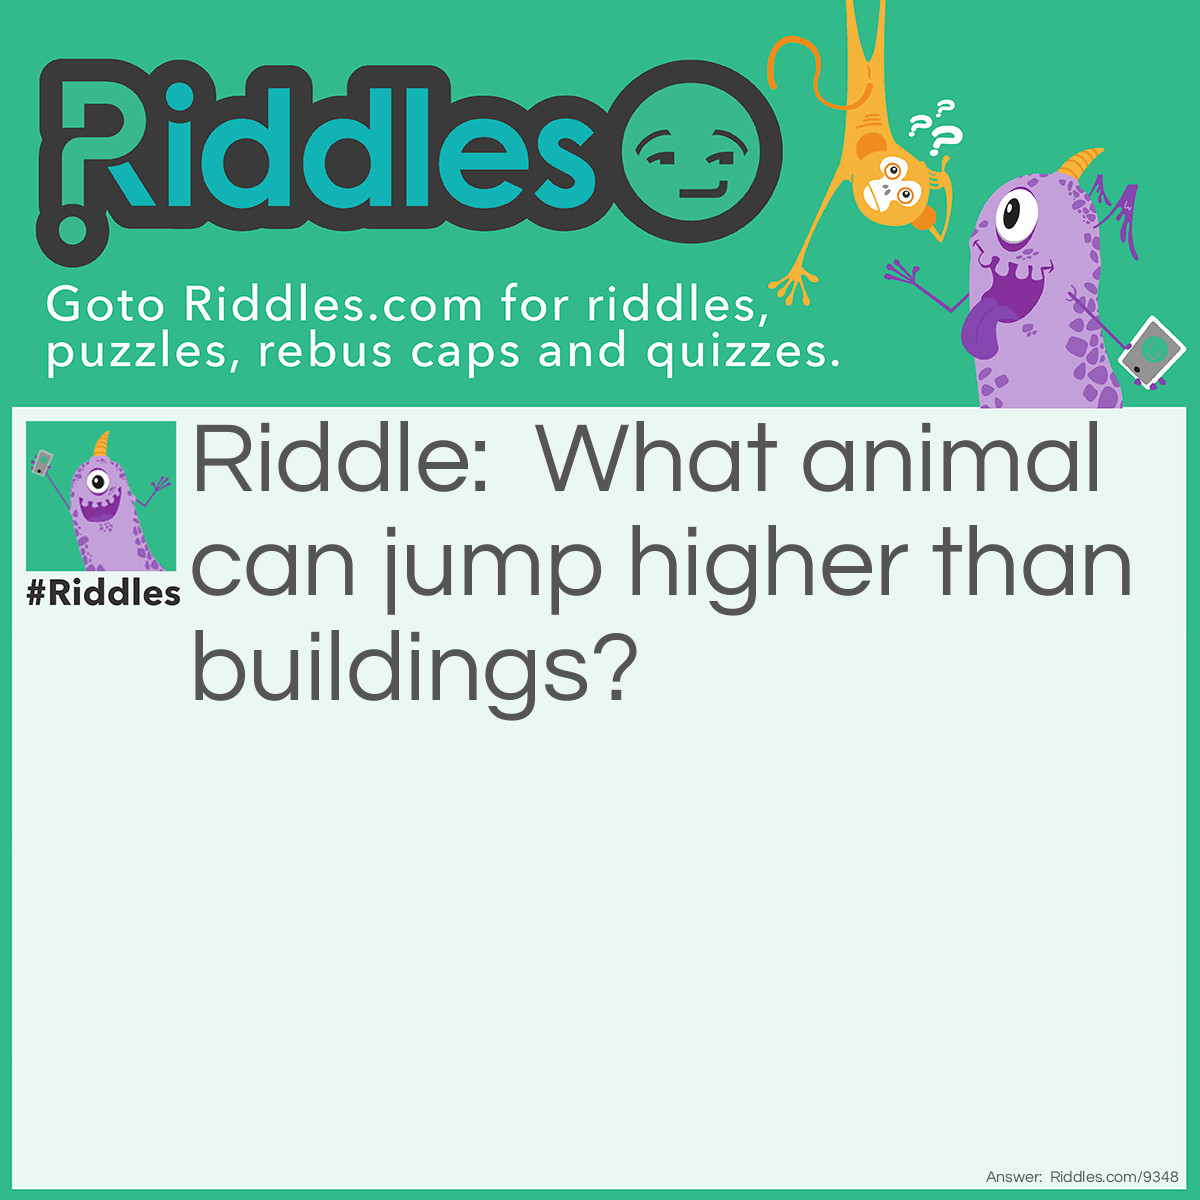 Riddle: What animal can jump higher than buildings? Answer: All animals! Buildings can't jump!